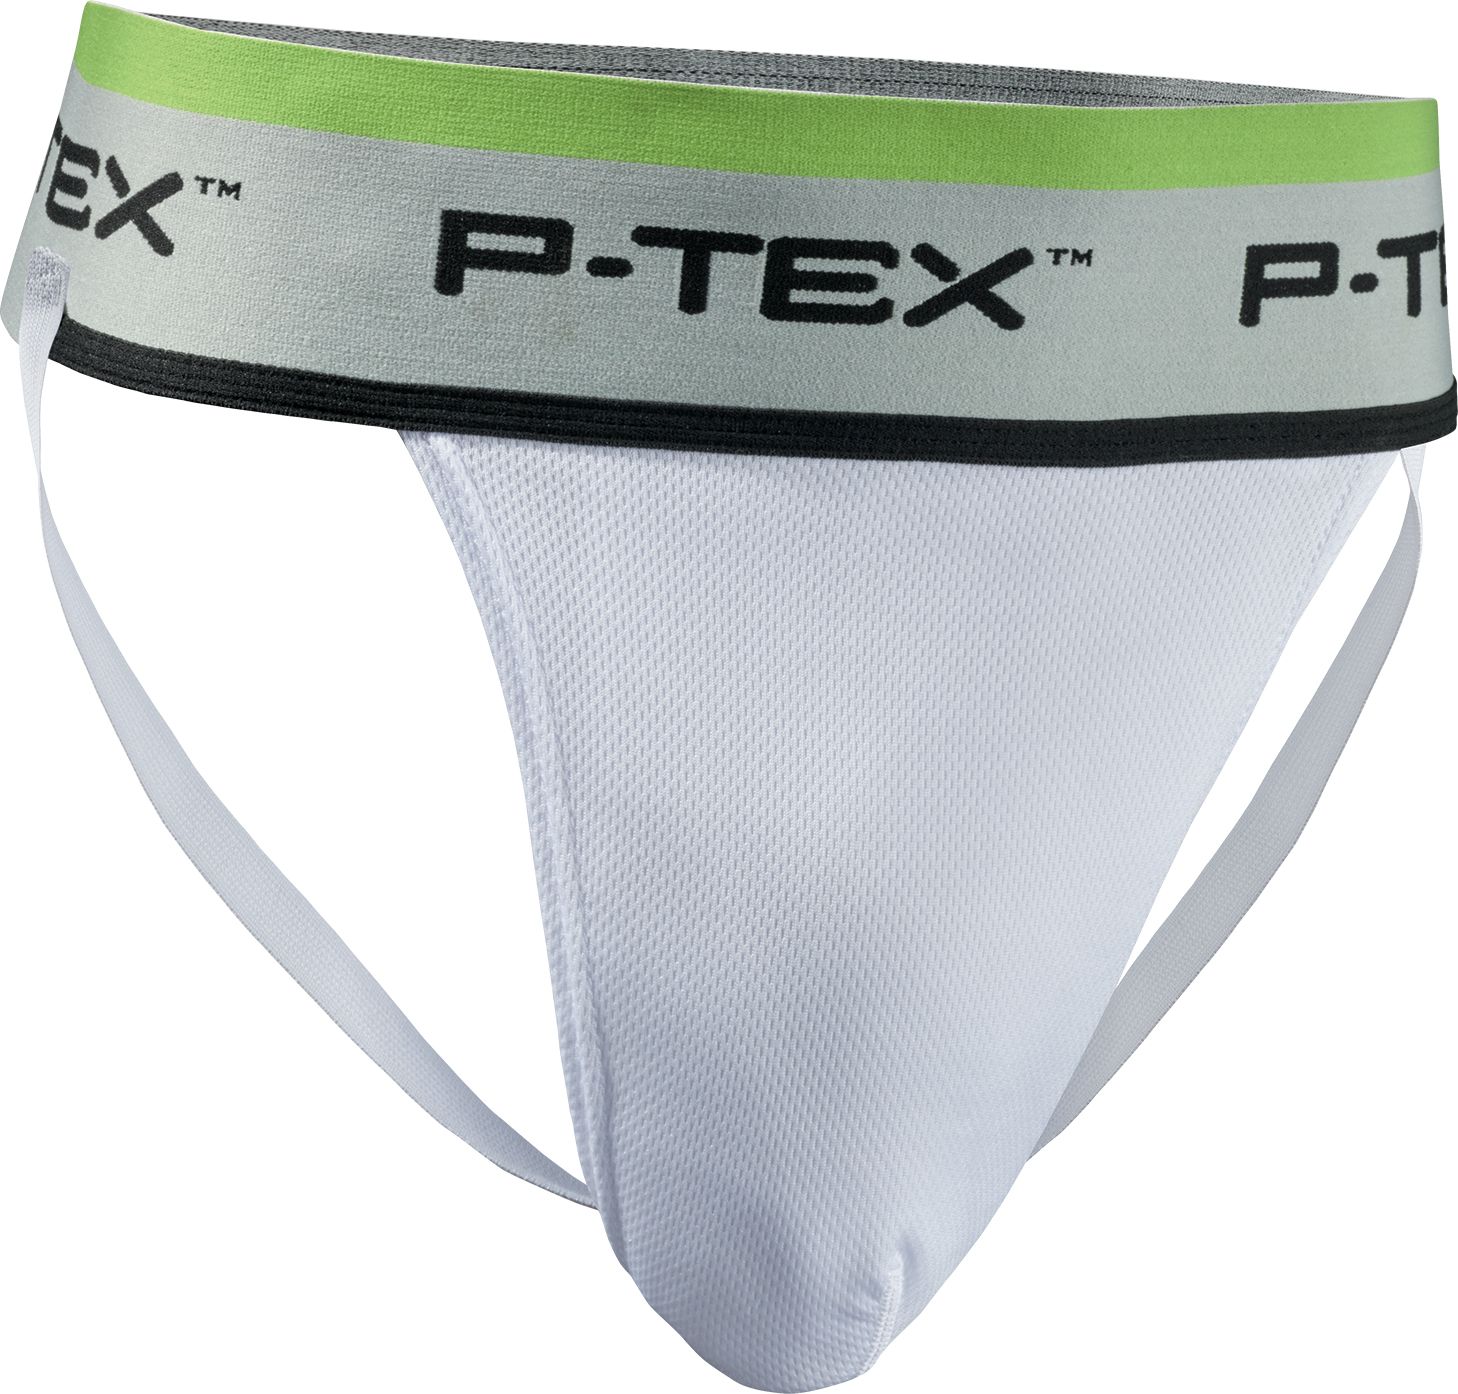 soft cup athletic supporter